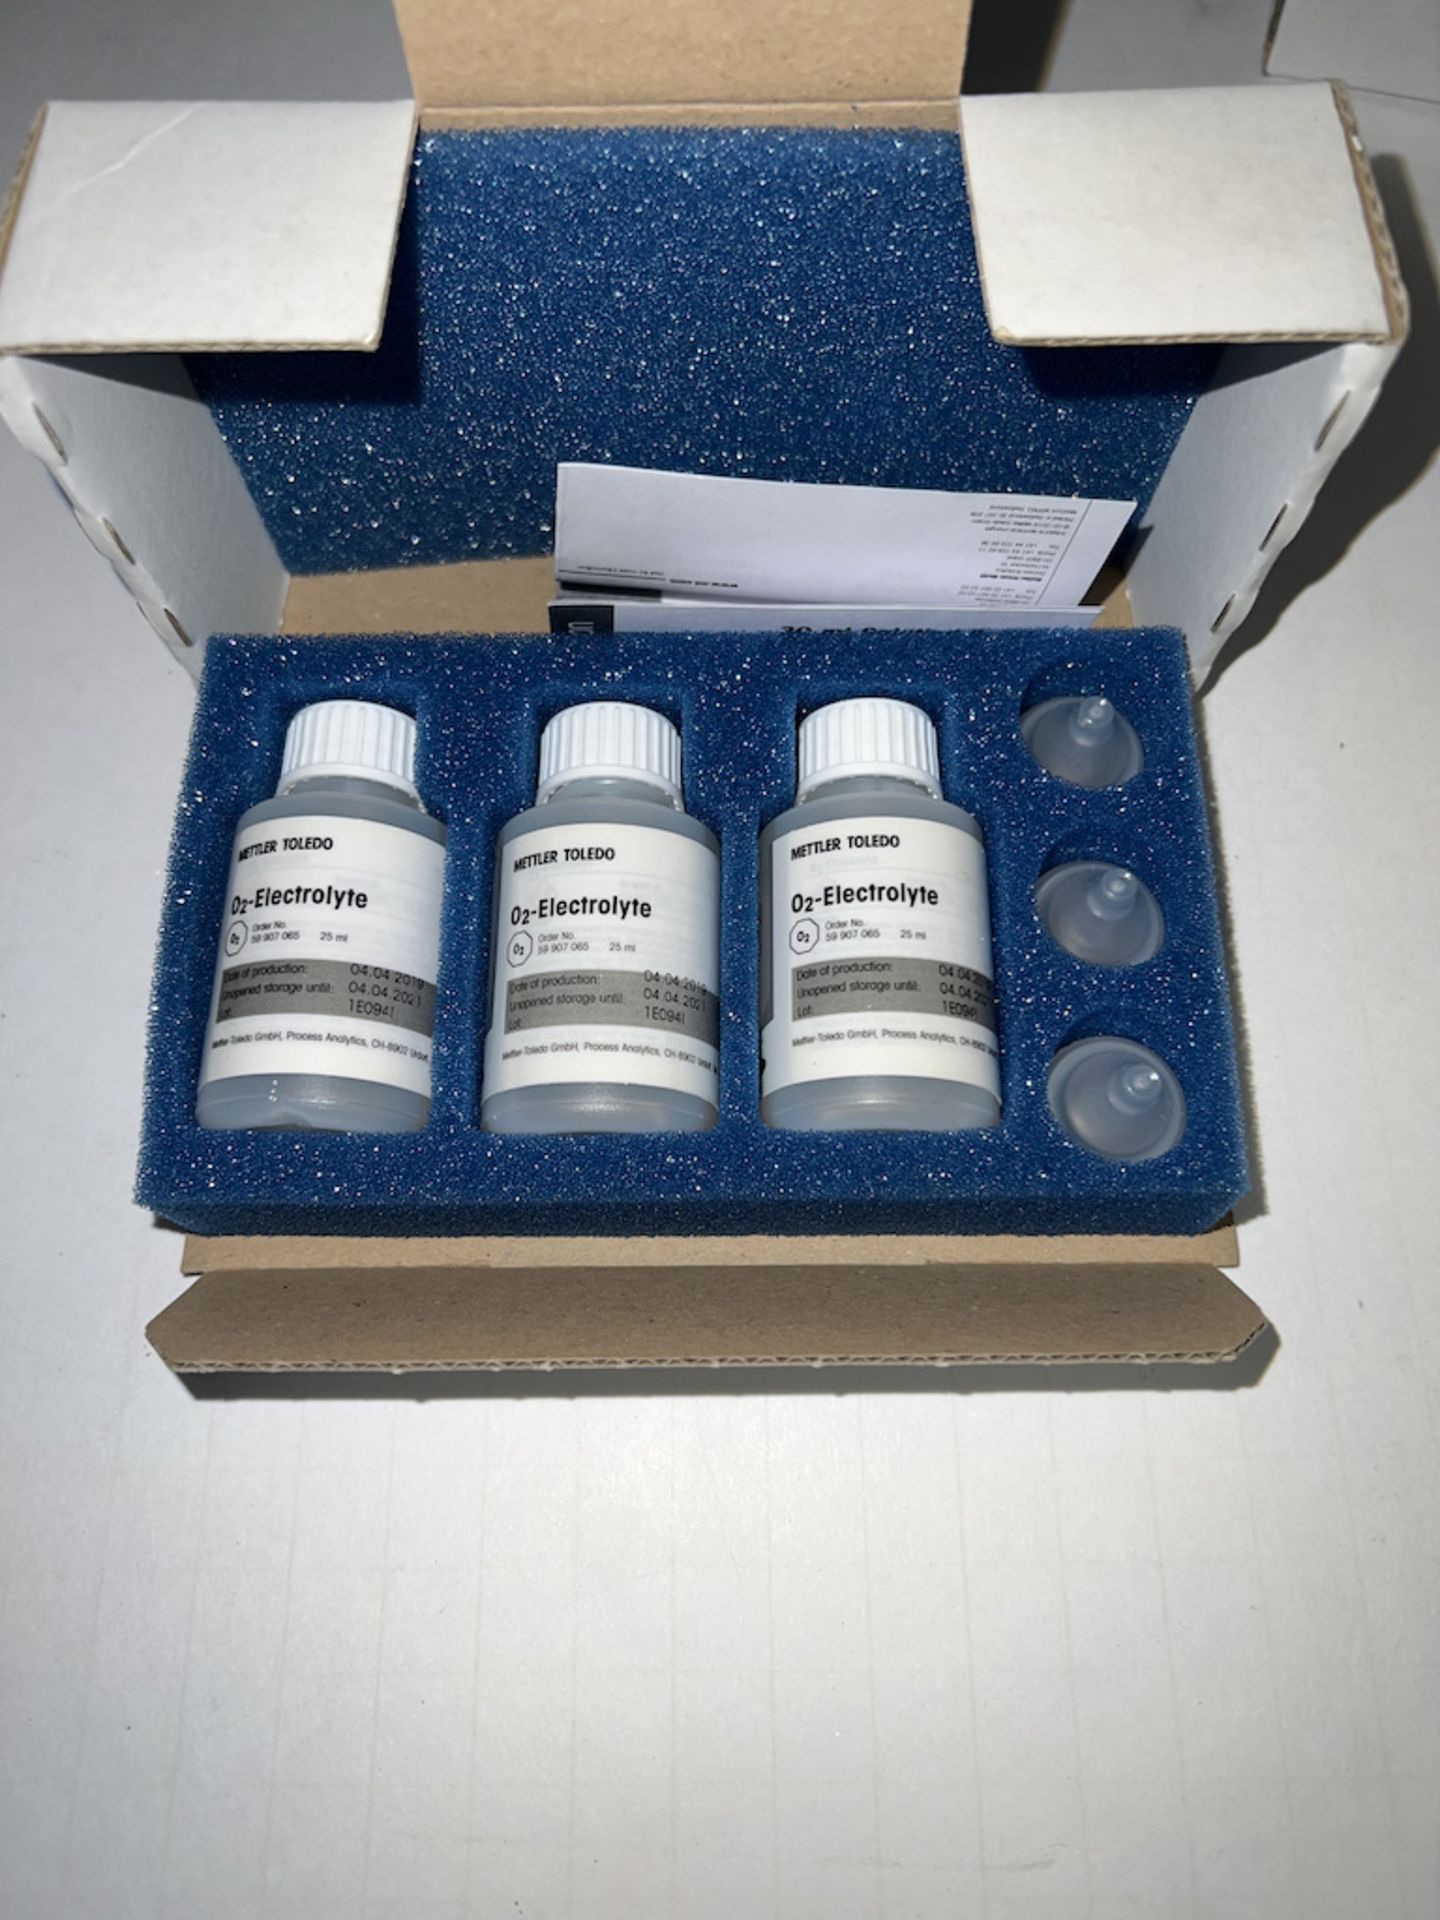 Lot of 3 containing 3 Mettler Toledo O2 Electrolyte Solution in 30mL Bottles with applicator - Image 2 of 2